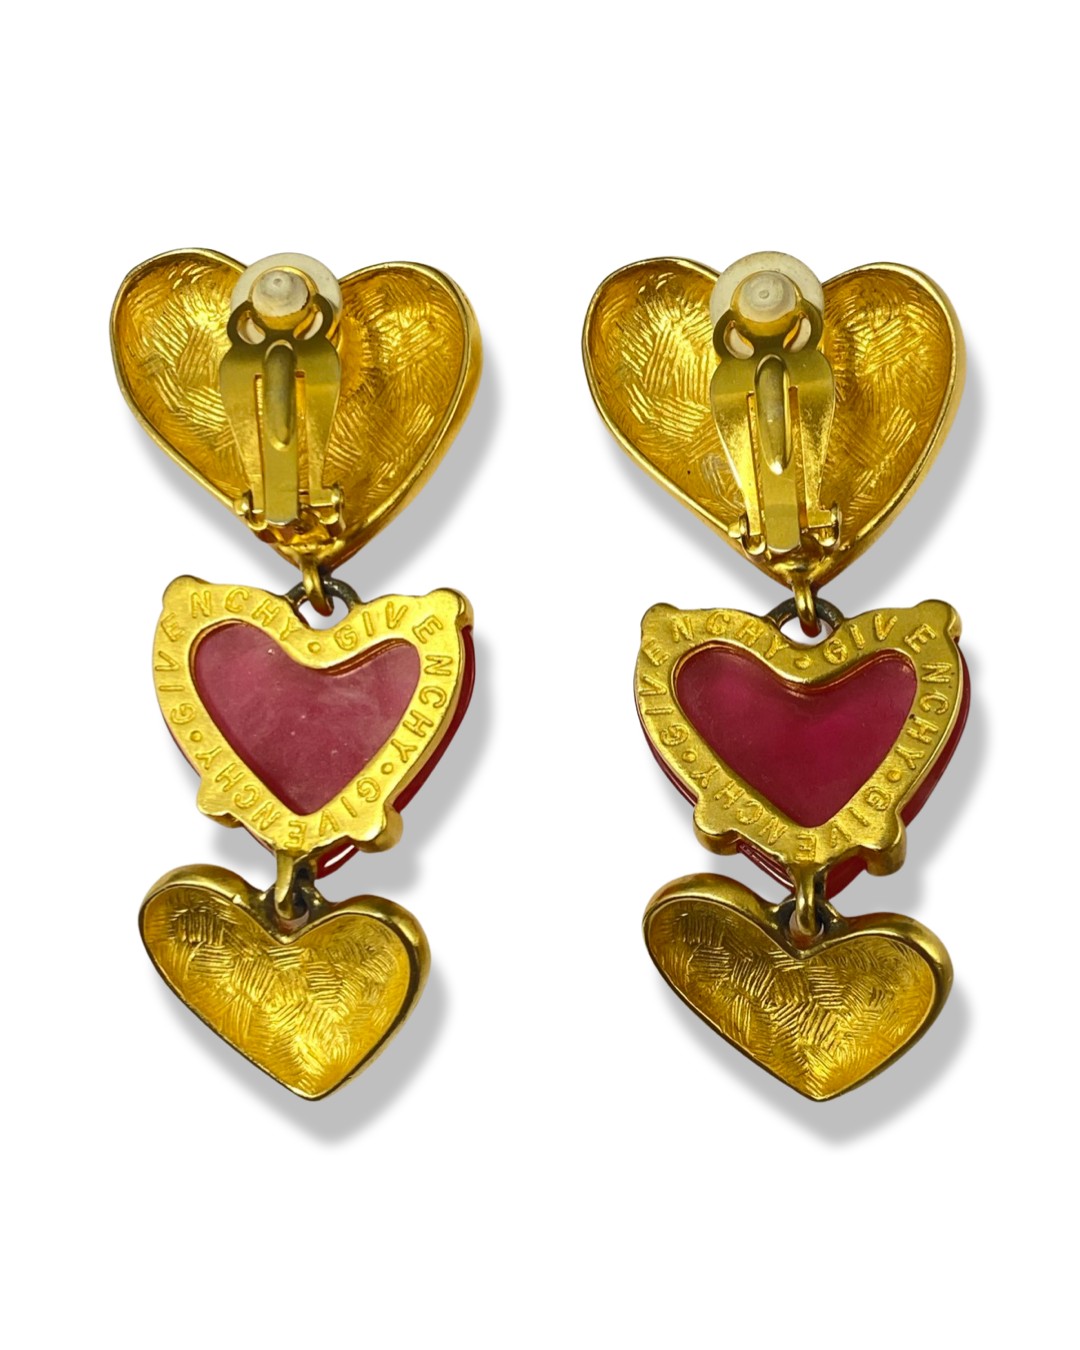 Pair Of Givenchy Pink & Gold Heart Design Drop Earrings weighing 58.3 grams and measuring 7.5cm in - Image 2 of 2